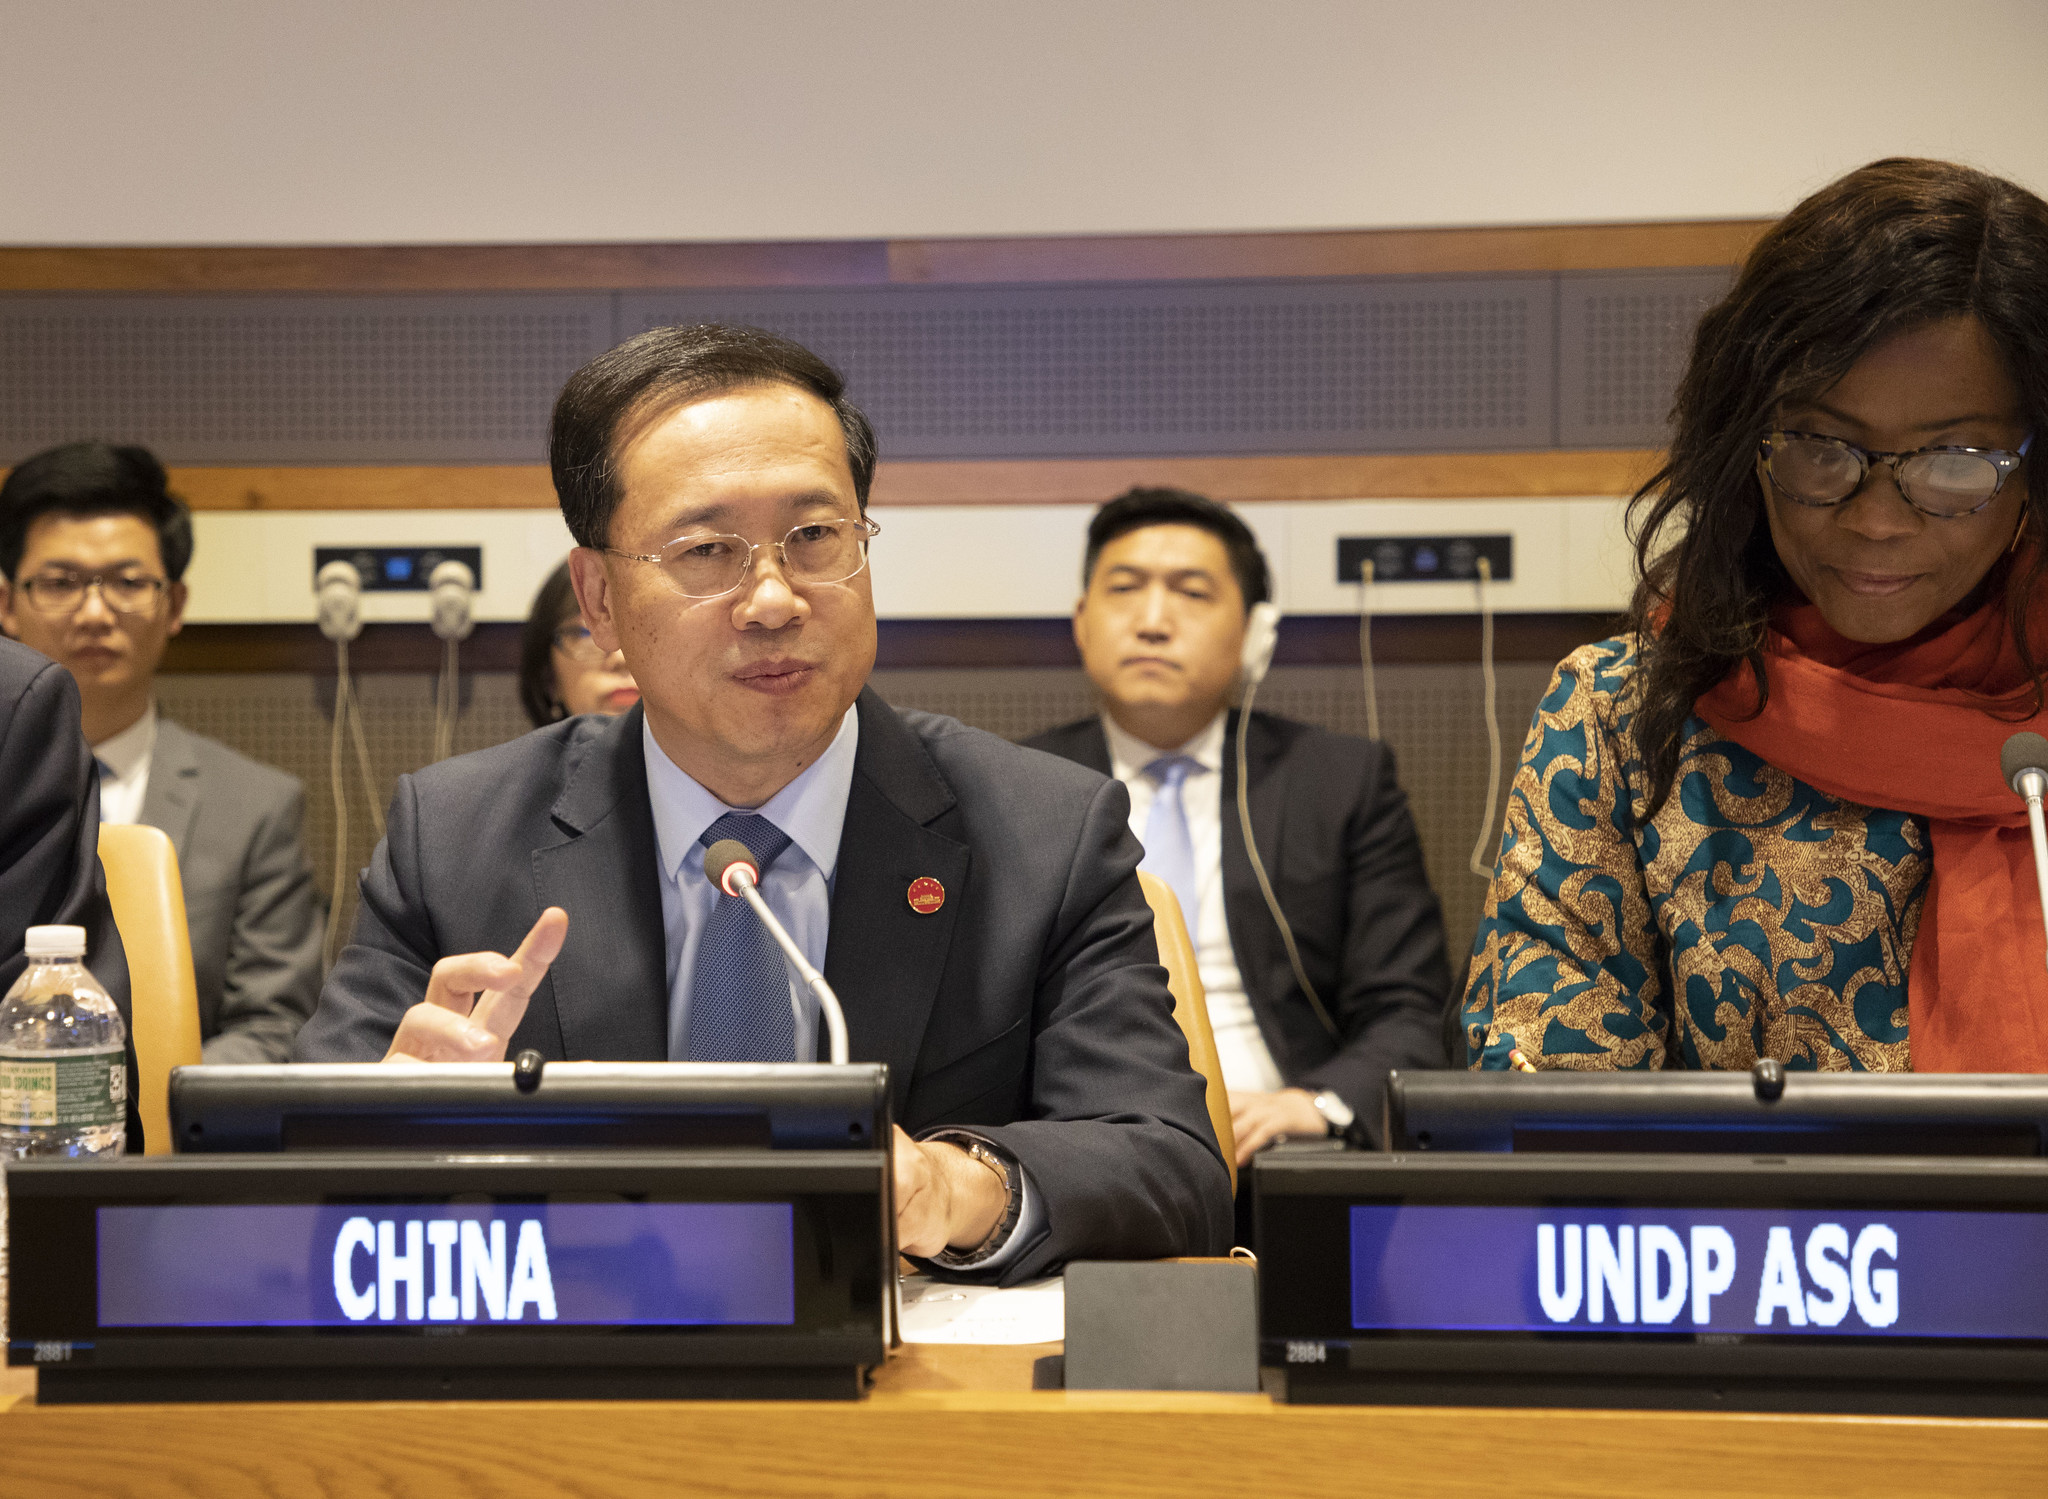 China International Development Cooperation Agency at UNDP headquarters in October 2018 (UNDP-Flickr)